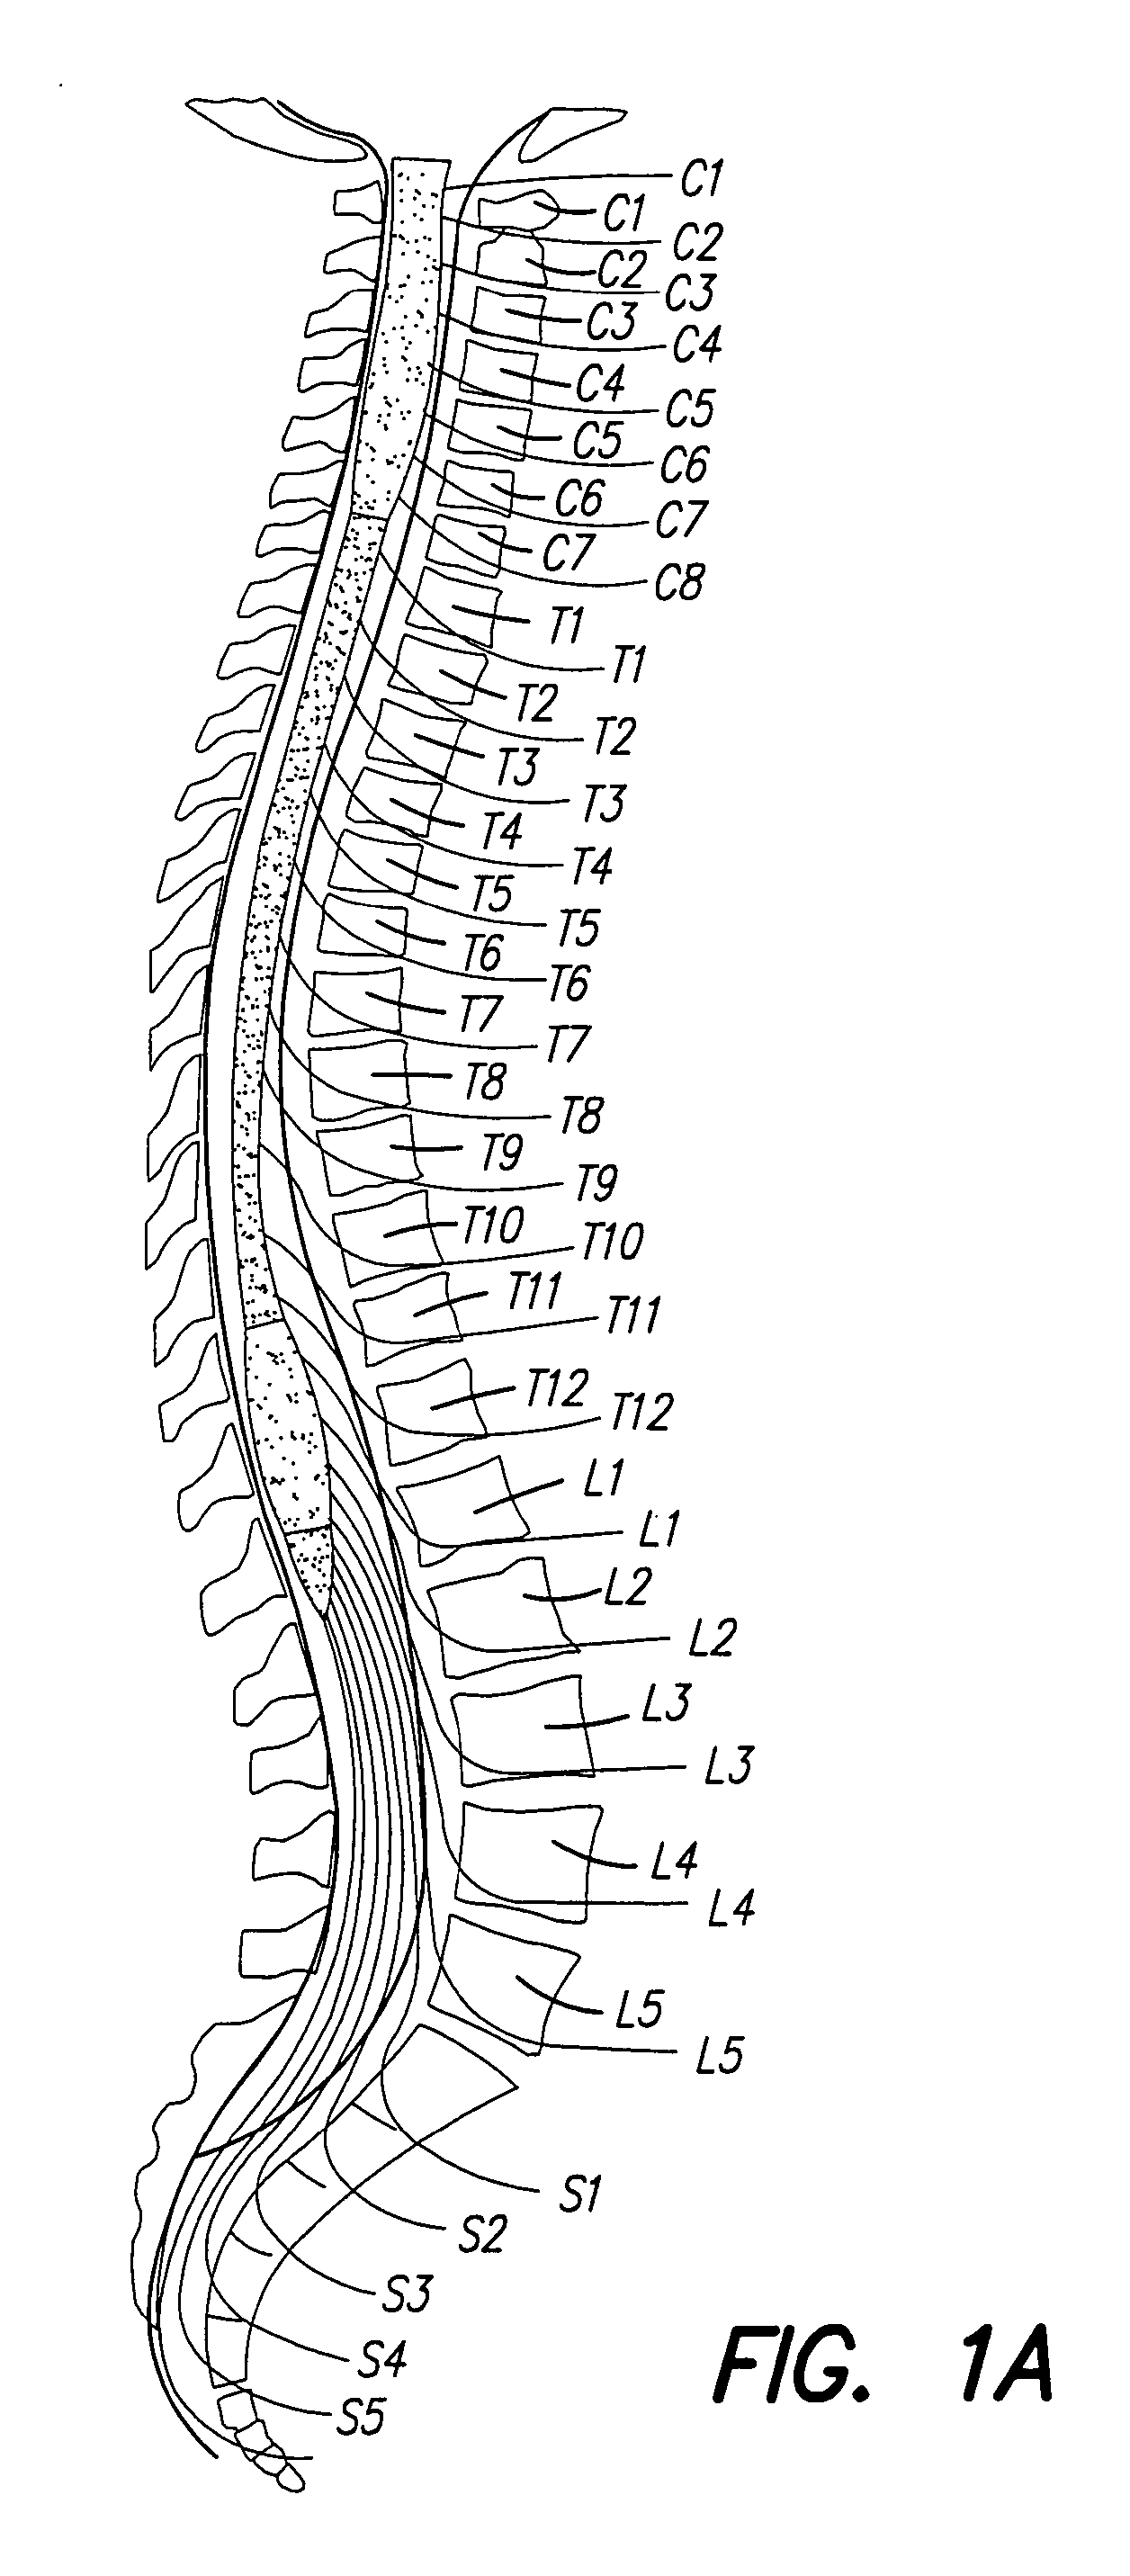 Methods for implanting a spinal cord stimulator